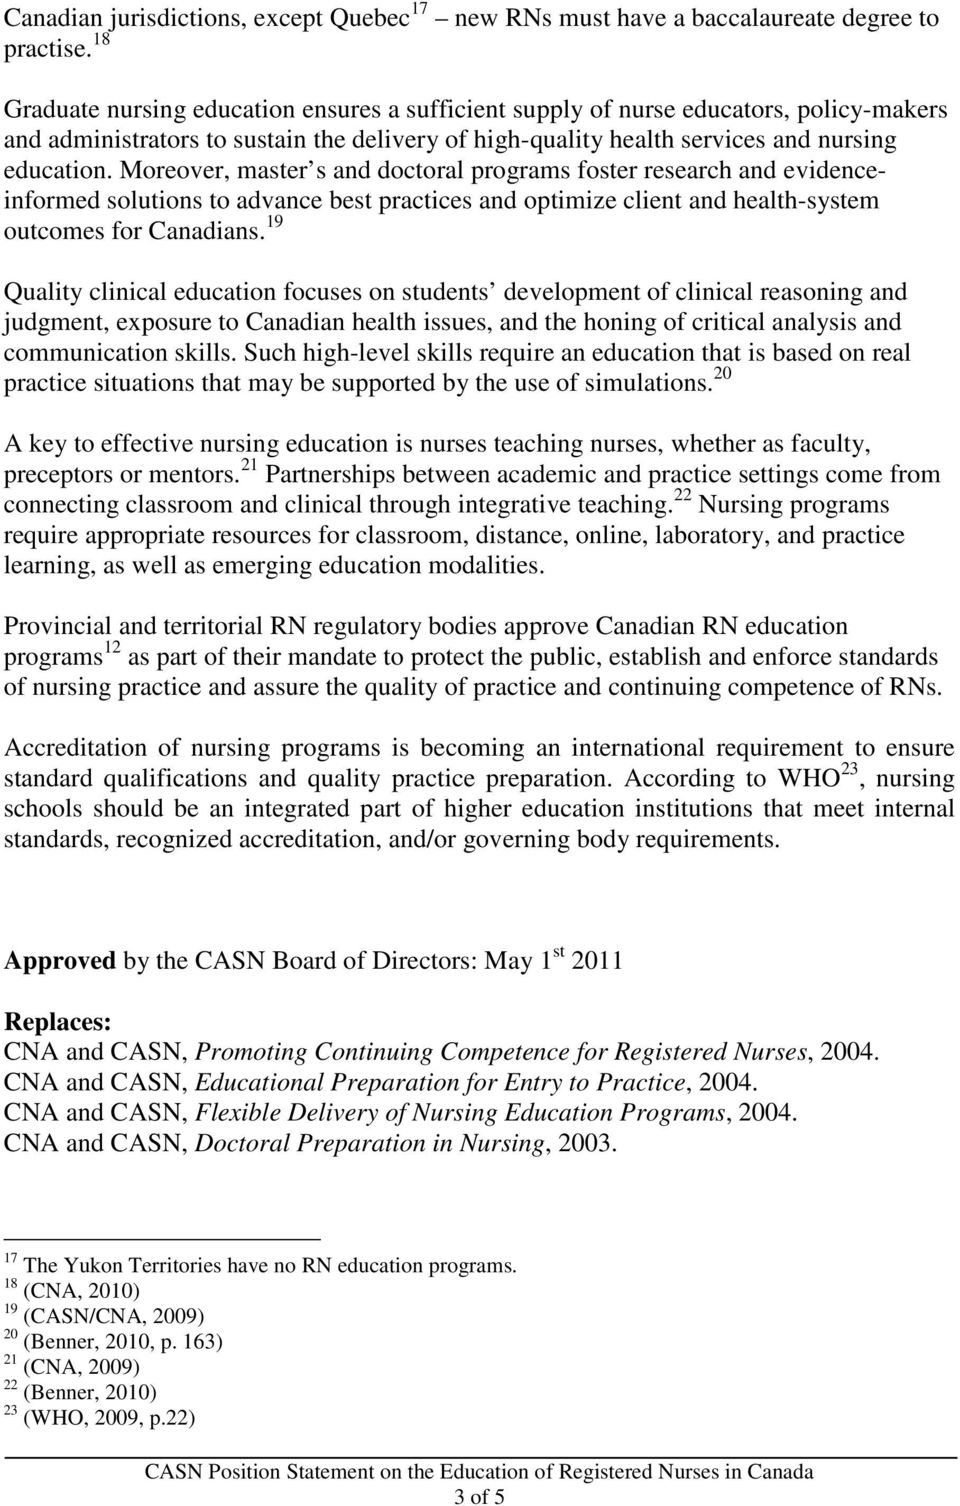 Position Statement Title Education Of Registered Nurses In